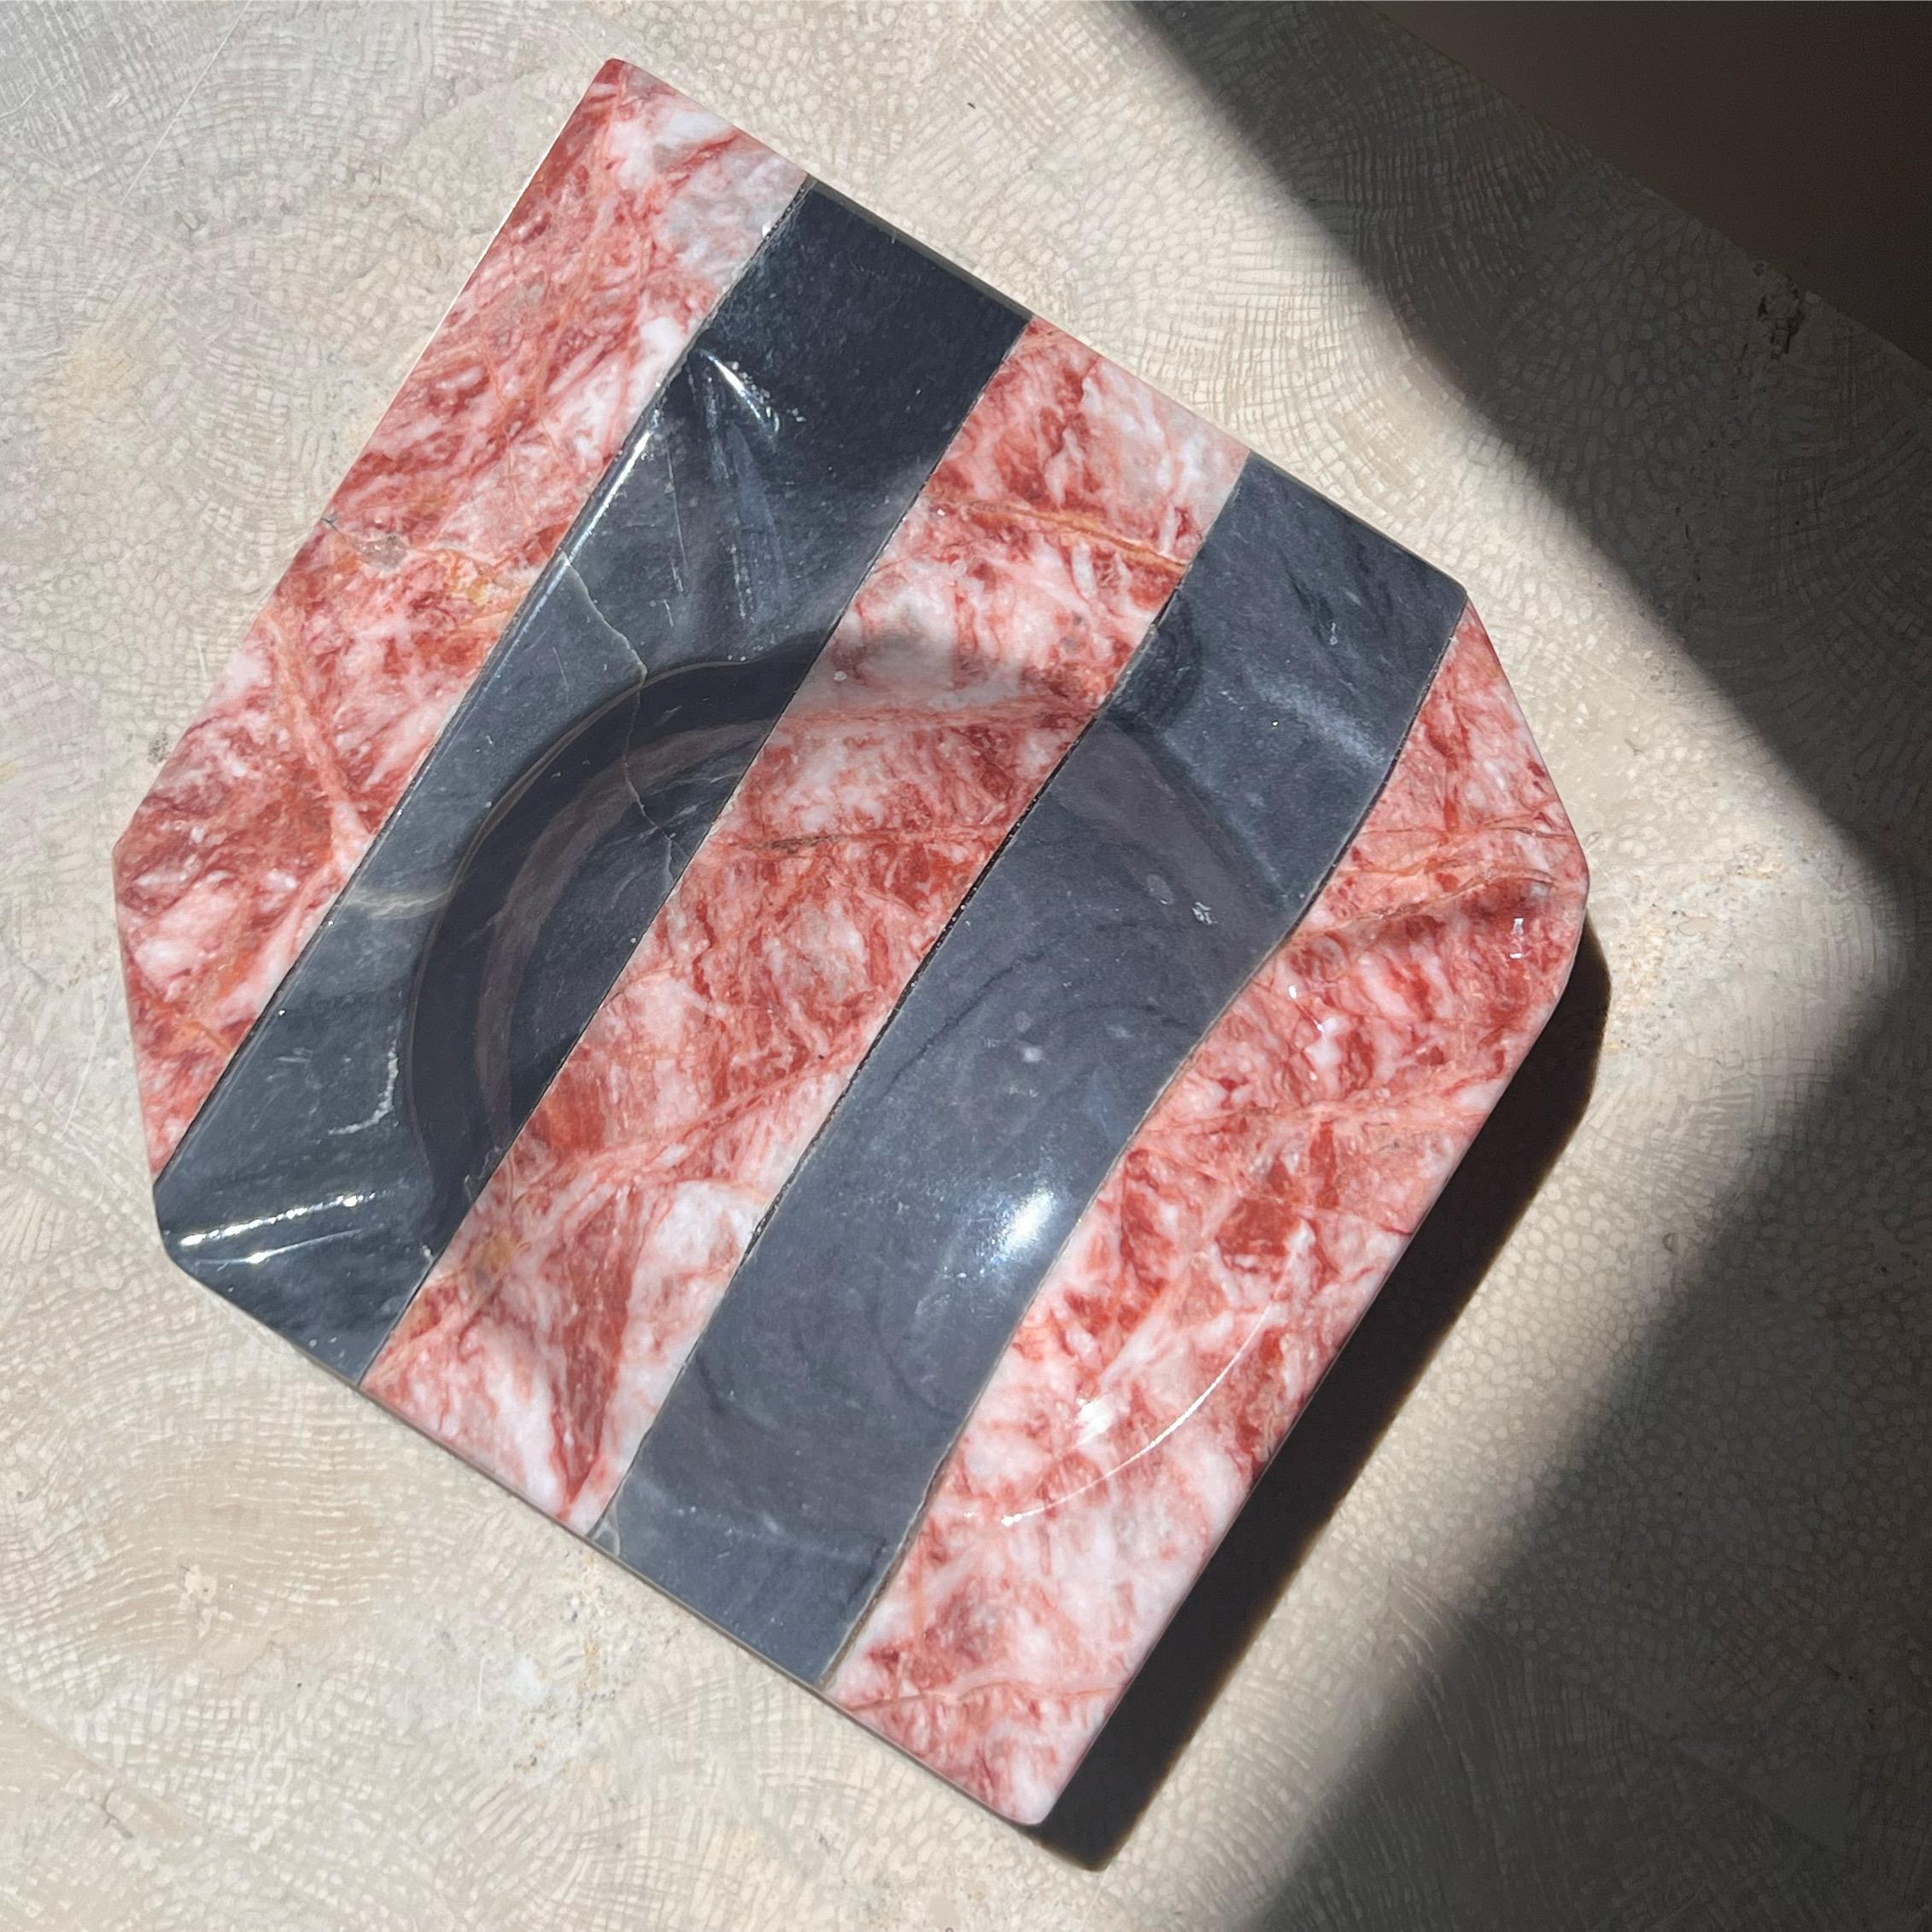 Vintage Italian pink and gray striped slanted marble ashtray, mid 20th century  11